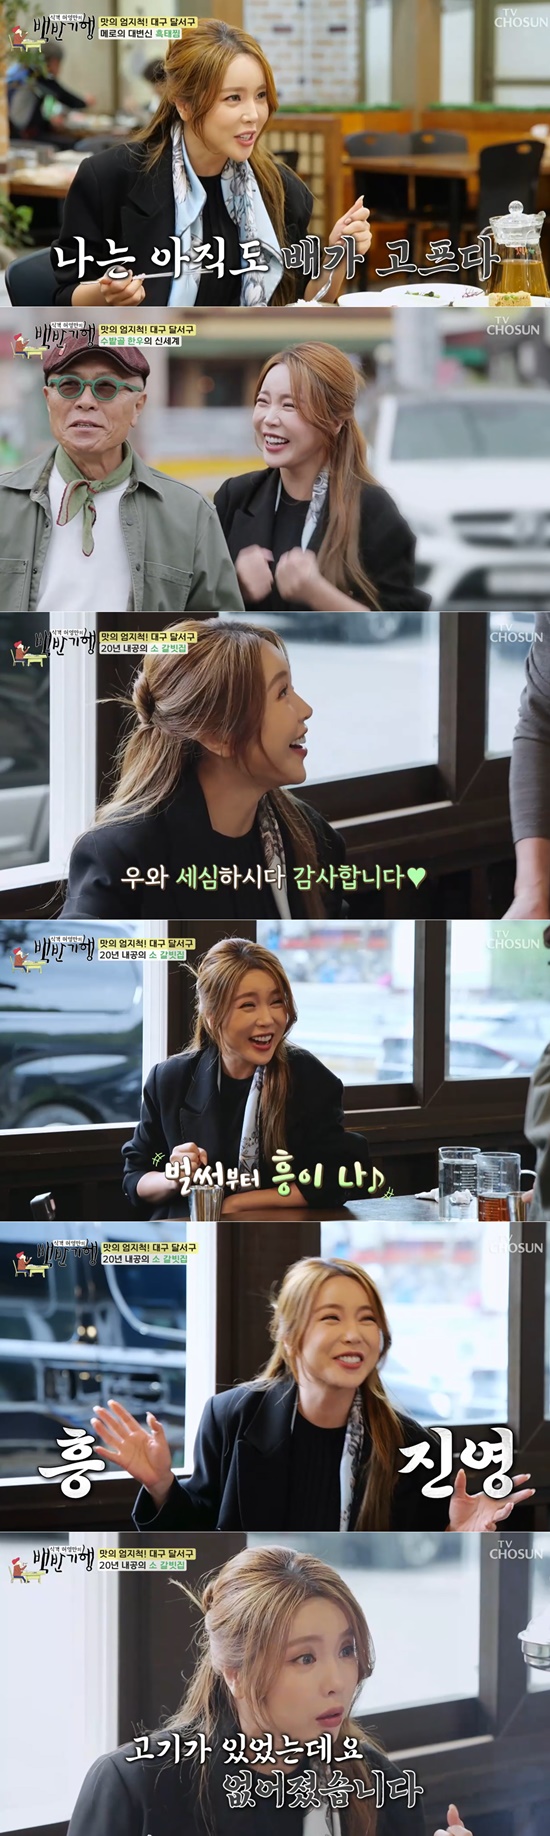 Singer Hong Jin-young filled Alumtravelogue with excitement.Huh Young Mans Food Travel (hereinafter Alumtravelogue) was broadcasted on the 5th by Hong Jin-young as a guest.On this day, Huh Young-man introduced Hong Jin-young as the main character to go to Dalseo-gu, Daegu. Hong Jin-young, who appeared as a unique energy and bright charm, said, I wanted to eat delicious food with my teacher.I really like what I eat, he said.Hong Jin-young, who entered the restaurant in earnest, set off the mood with a patented charm parade and boasted Huh Young-man and Mukbang chemistry as a unique taste expression.Here, Battery of Love as well as a number of Hit songs with the song of Hong Jin-young added to the excitement.Huh Young-man smiled at Hong Jin-youngs well-fed appearance, and Huh Young-man took Hong Jin-young to visit a 20-year-old cow barbecue restaurant.As soon as Hong Jin-young saw his boss, he praised him for skin is too good and careful and produced a warm atmosphere.Before going to Mukbang in earnest, Hong Jin-young even sang I like meat so much. Huh Young-man said, I do not like meat very much.I do not know how to run my physical strength, and Hong Jin-young made Huh Young-man laugh with a furious Chain Reaction.Hong Jin-young was impressed by the taste of well-baked ribs. I was constantly impressed by Mukbang, which led to seasoned ribs on raw ribs. Then Hong Jin-young stuck his gaze somewhere.A nine-month-old baby guest eating at a table right nearby.Hong Jin-young abruptly got up from his seat and approached the baby guest; Huh Young-man asked Hong Jin-young if he liked the baby, to which Hong Jin-young replied, I love it so much.Then, in the voice of a dolphin, he said, Hello, please hold my aunts hand. The baby also responded with a smile in the charm of Hong Jin-young.Since then, Hong Jin-youngs Chain Reaction artisan charm has continued.Huh Young-man finished the Alumtravelogue with Hong Jin-youngs excitement and added a warm atmosphere by presenting a book.Pictures: TV Chosun broadcast screen